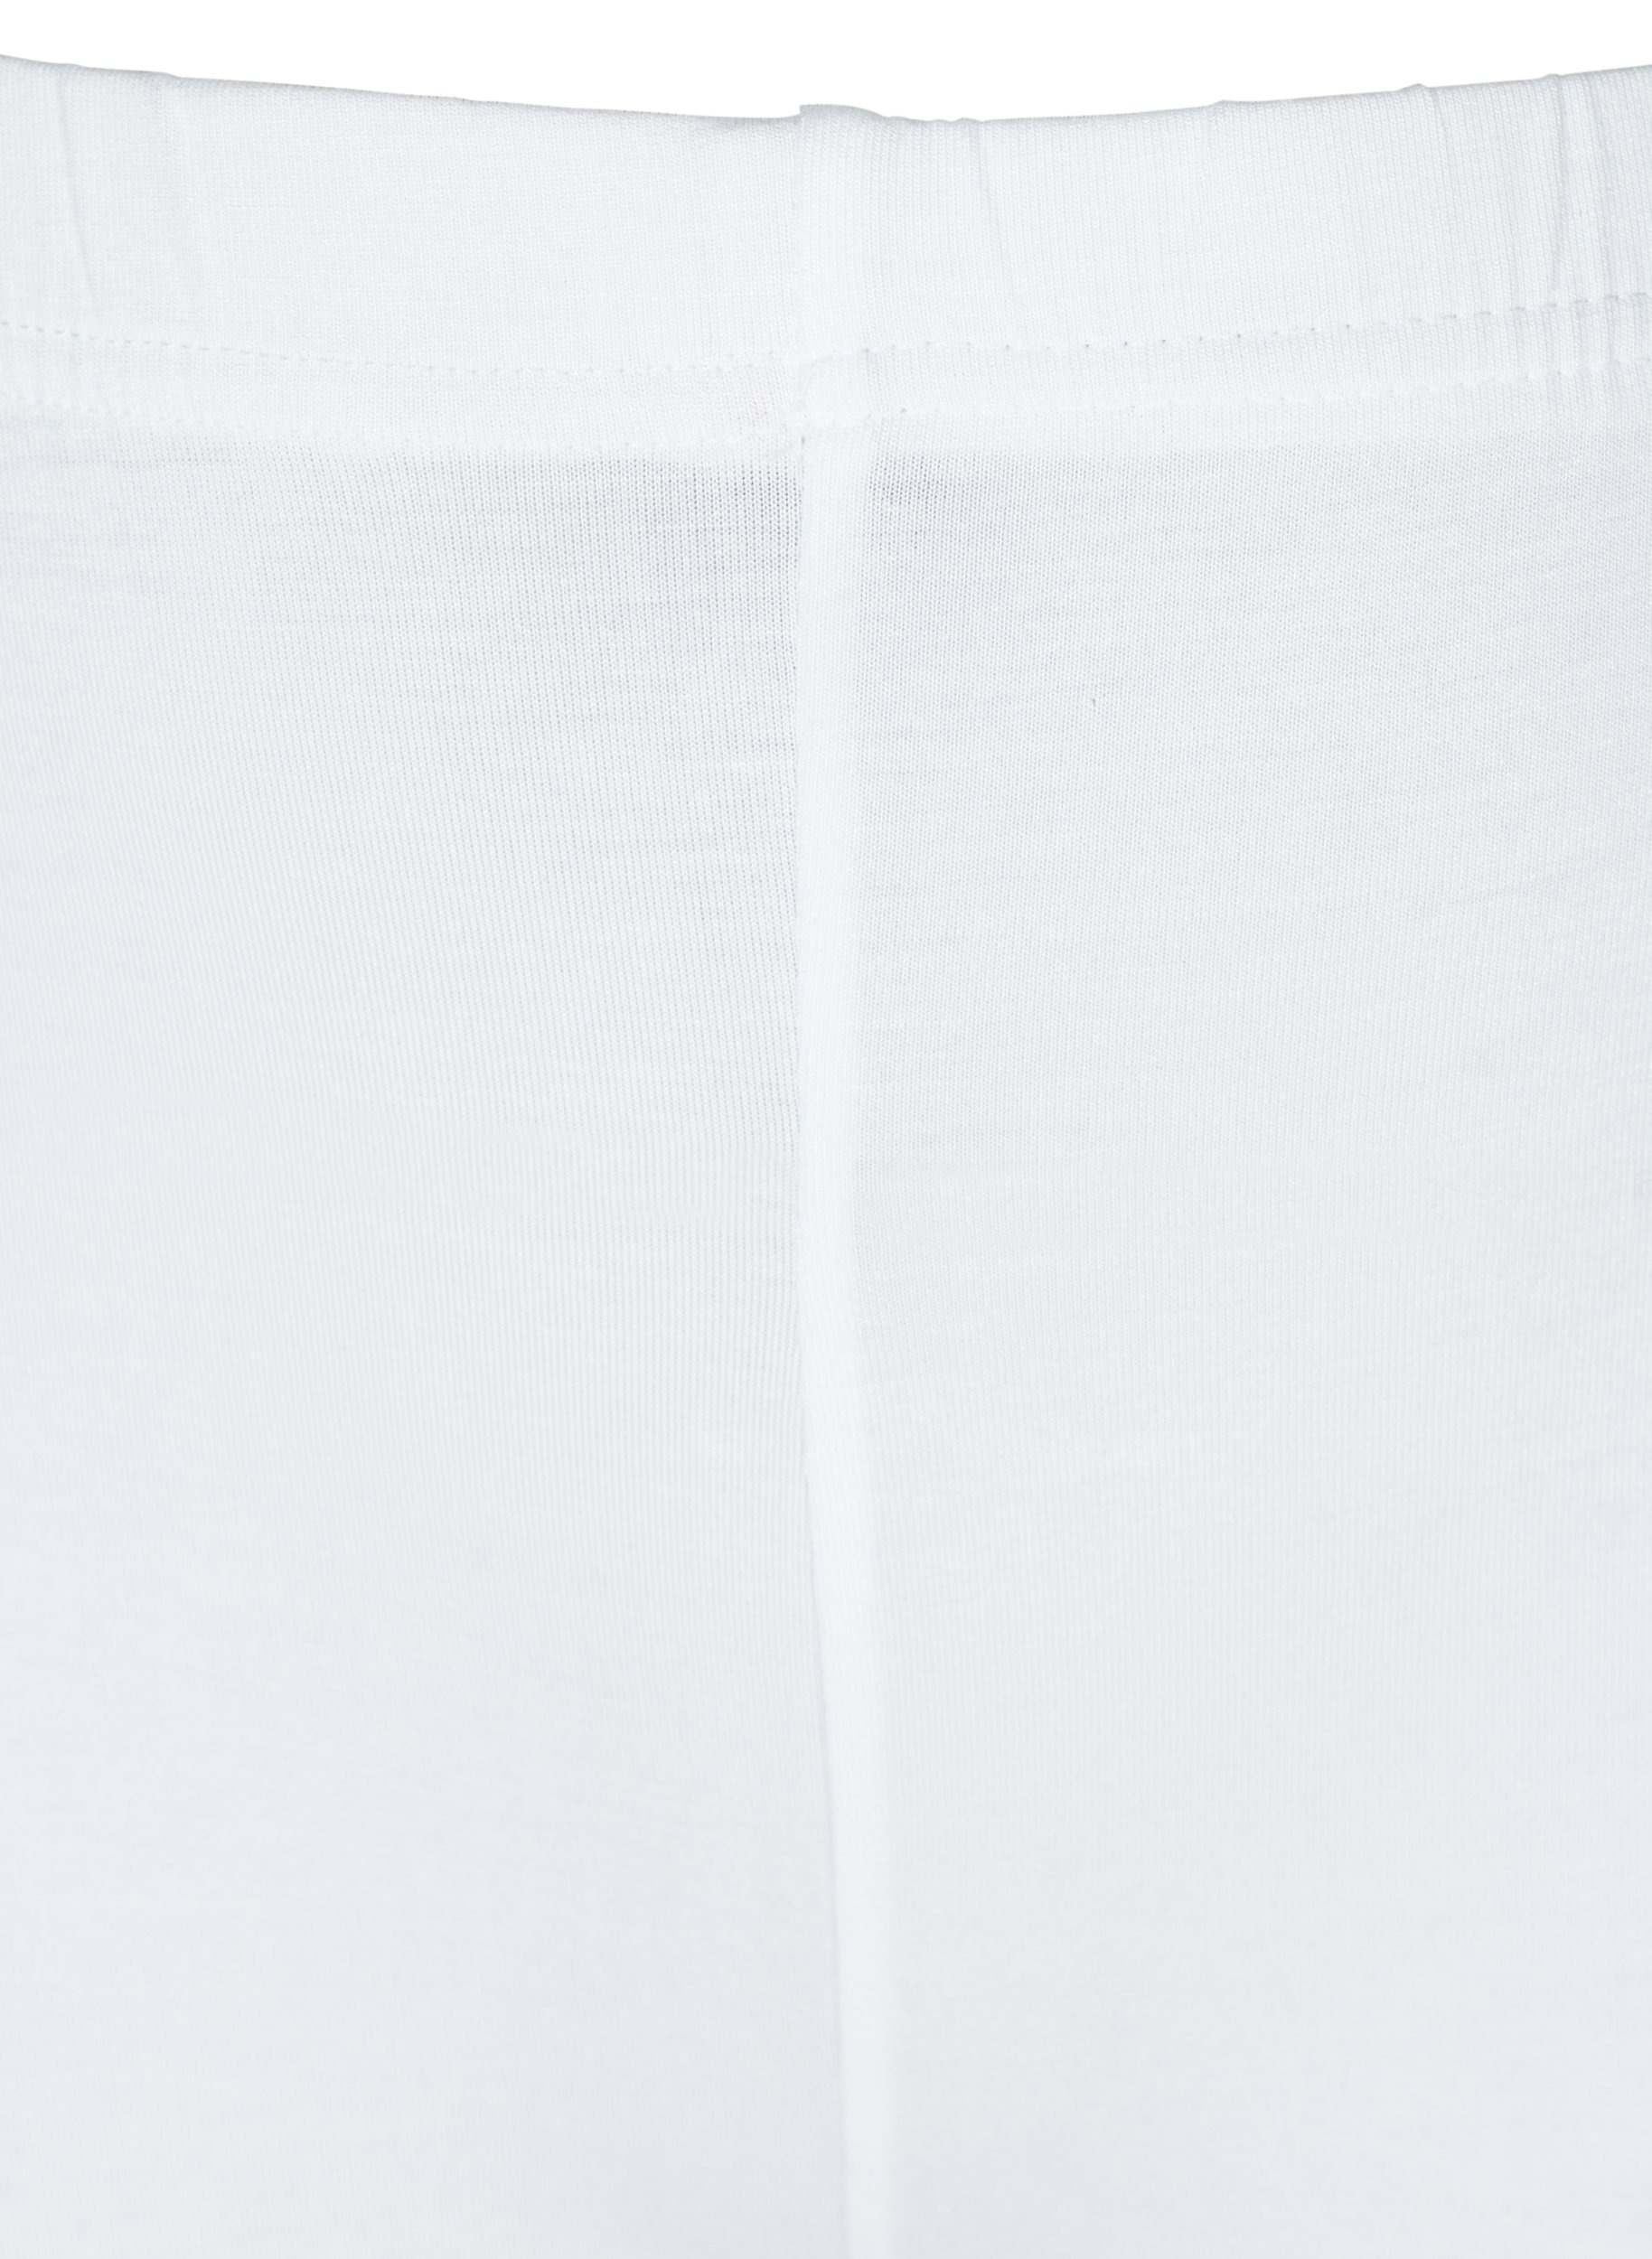 Cycling shorts with a lace trim, Bright White, Packshot image number 2